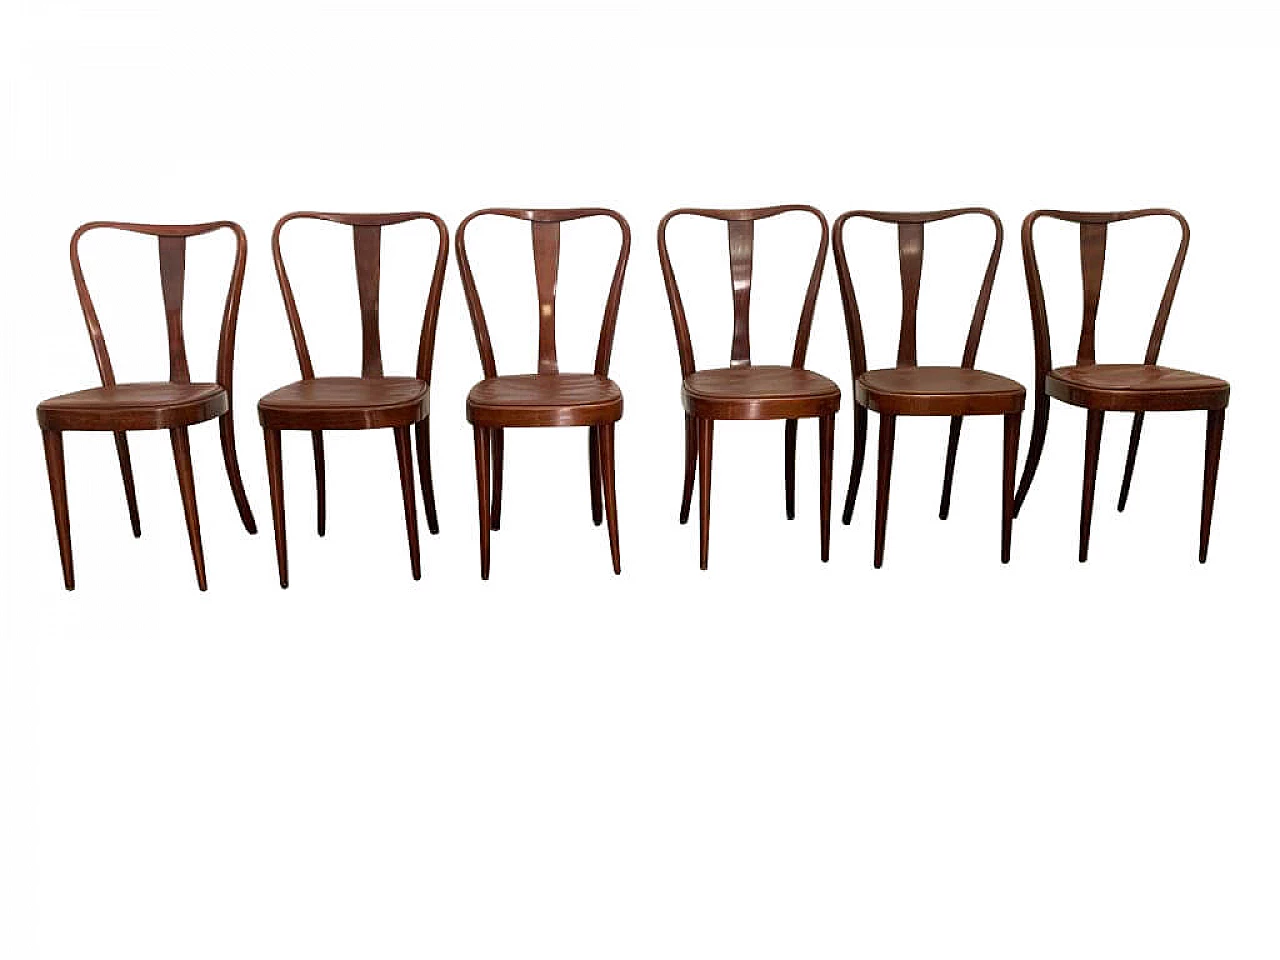 6 Dining chairs with leatherette seat by Pirelli Sapsa, 1950s 1202920